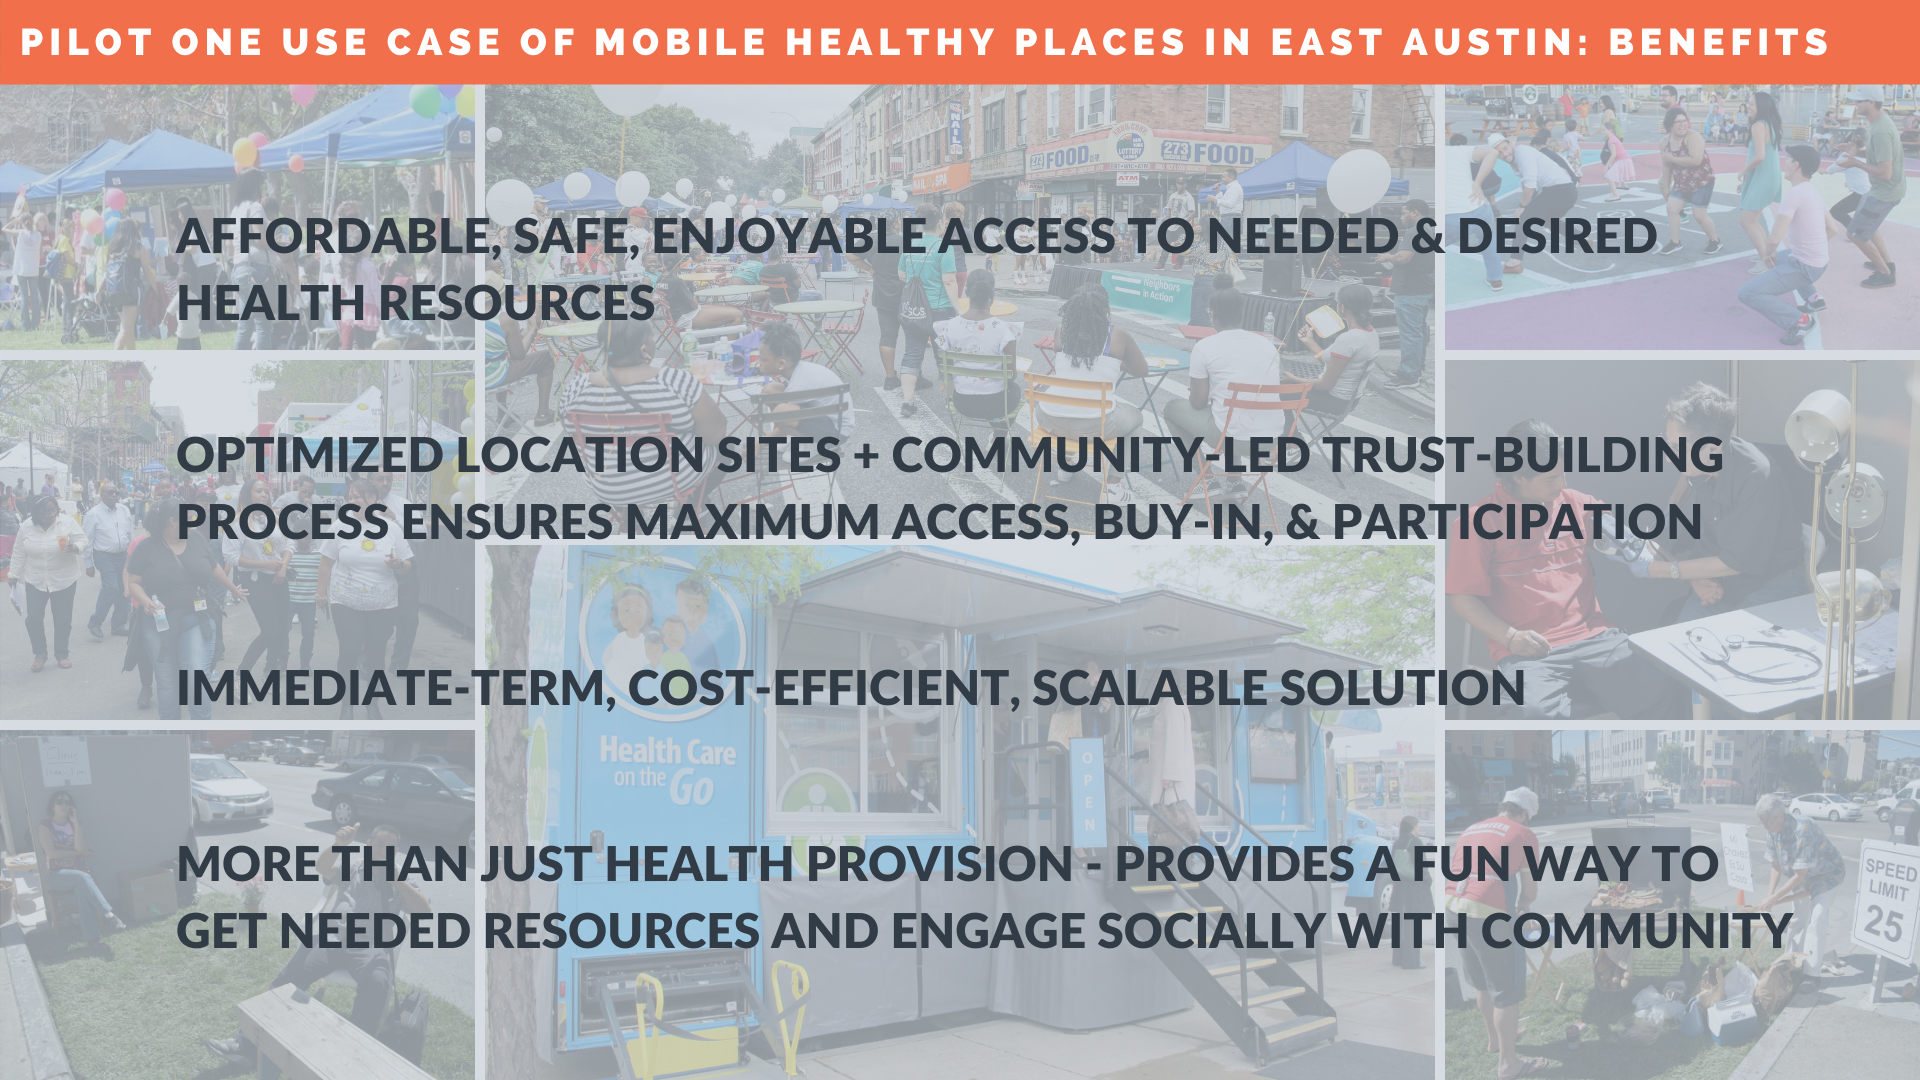  This data-driven, community-led approach gives East Austin residents affordable, safe, and enjoyable access to healthy living, which serves to connect them, in a near-term, optimized, and feasible way, that engenders: Wellness, Happiness, Dignity, H